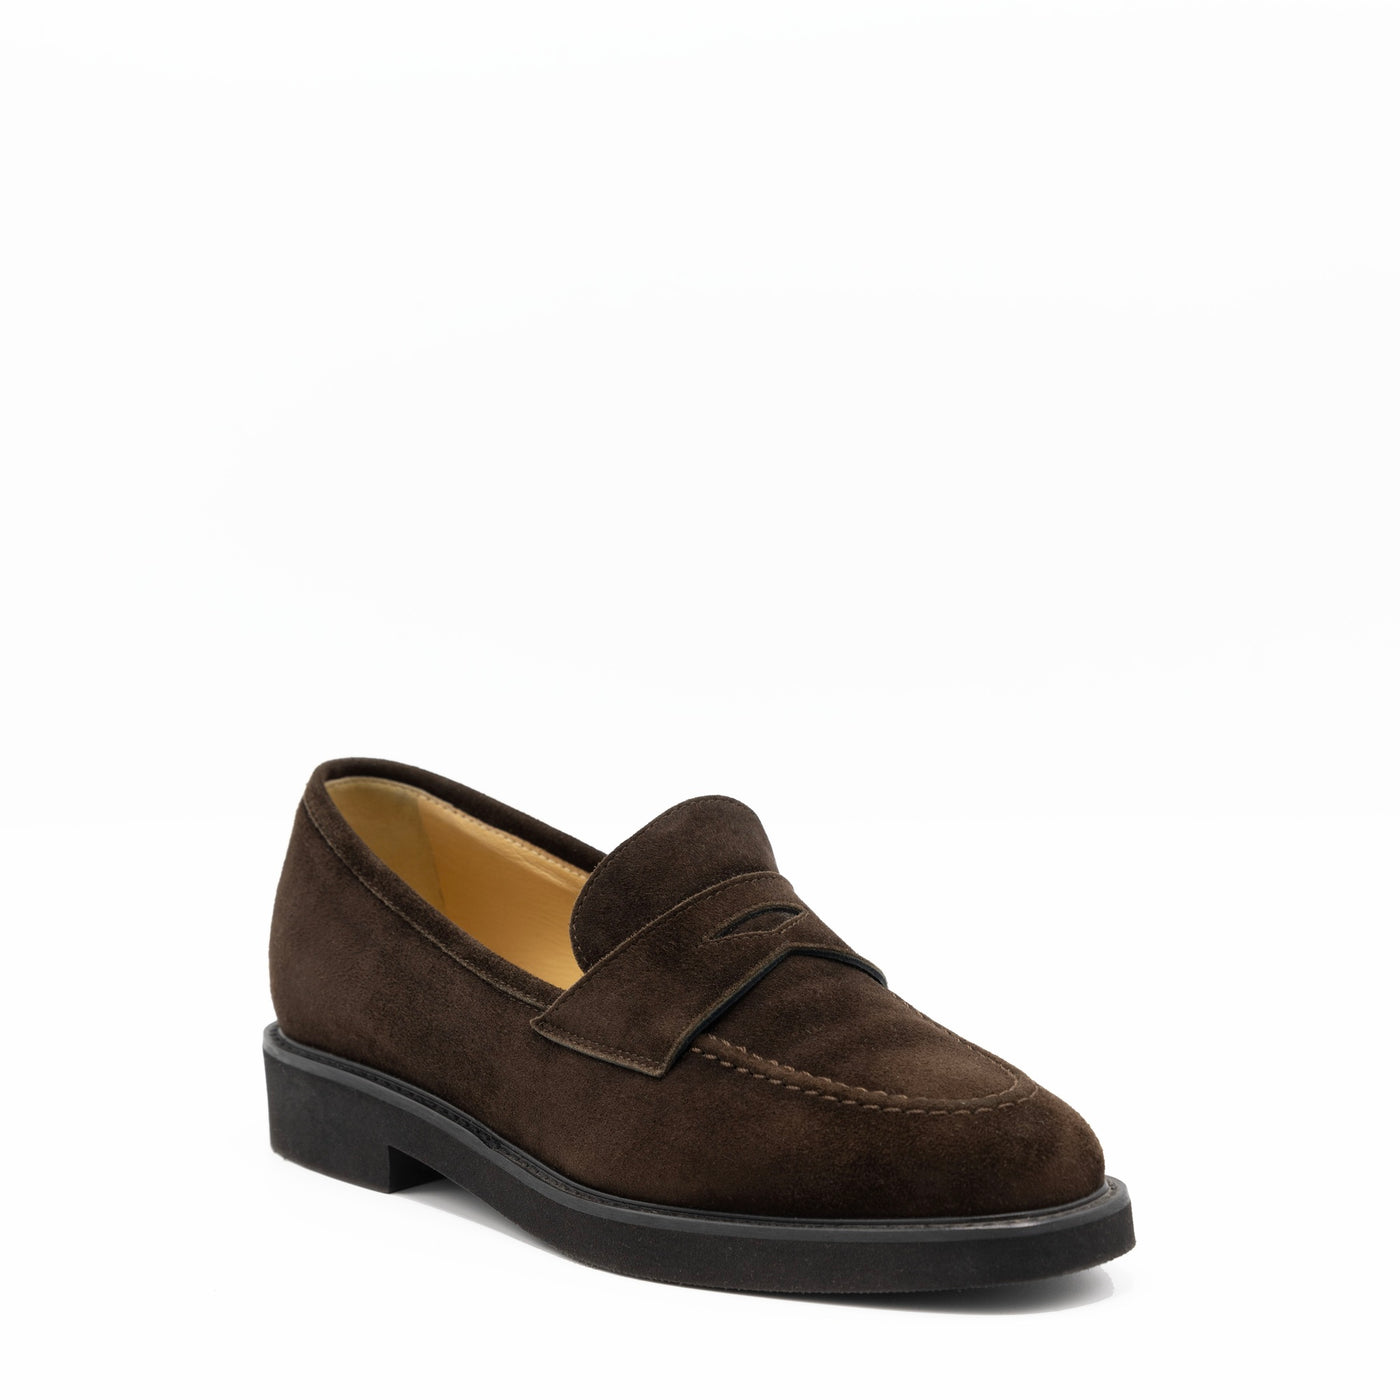 Gomma Penny Loafers Brown Suede